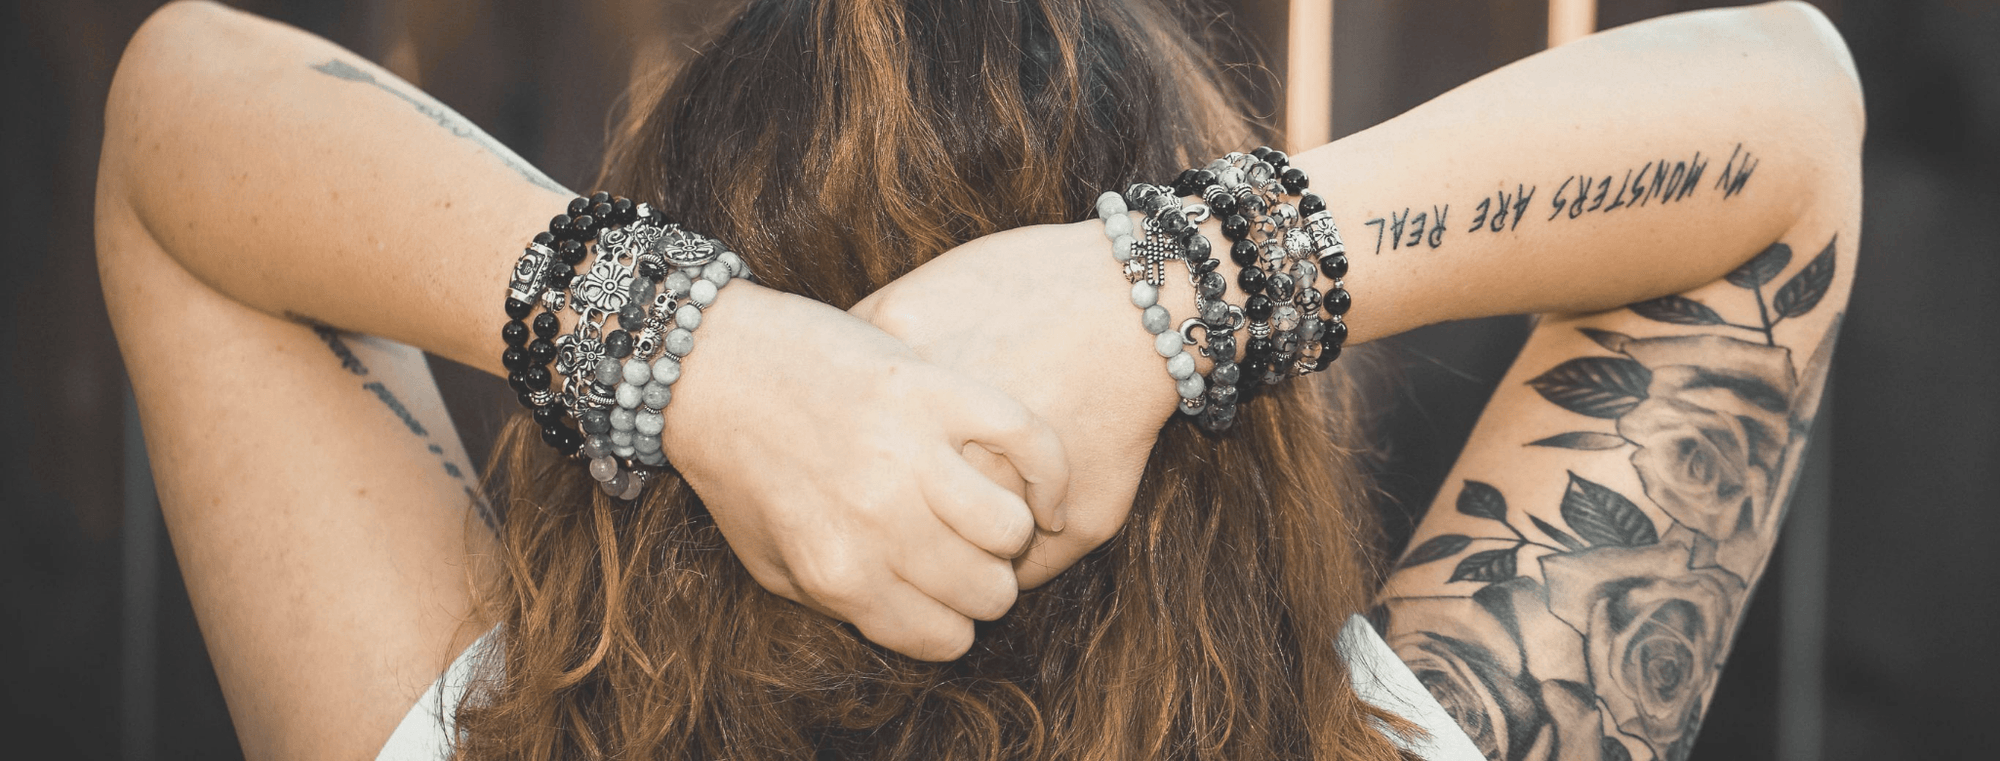 Rock My Wings Launches Website with Rock n' Roll Jewelry